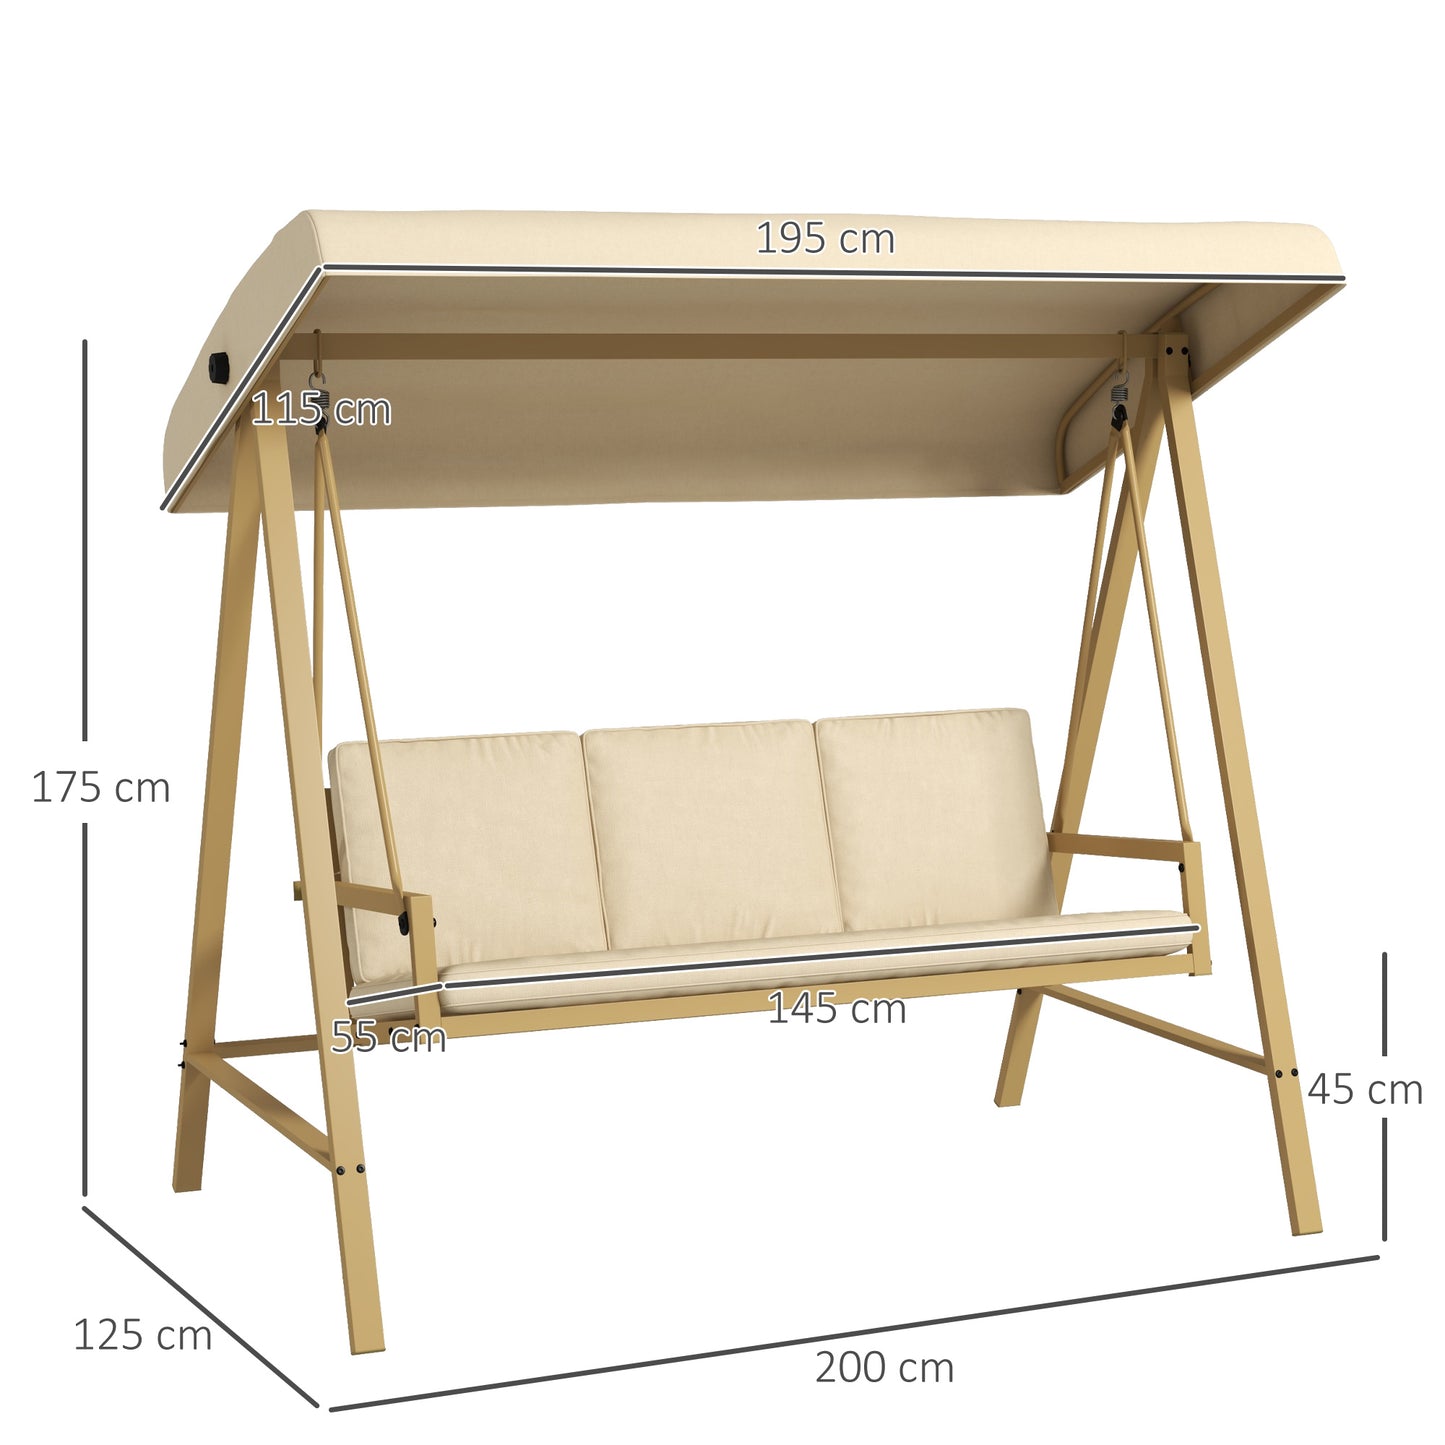 Outsunny 3 Seater Garden Swing Chair, Outdoor Hammock Bench with Adjustable Canopy, Removable Cushions and Steel Frame, Beige